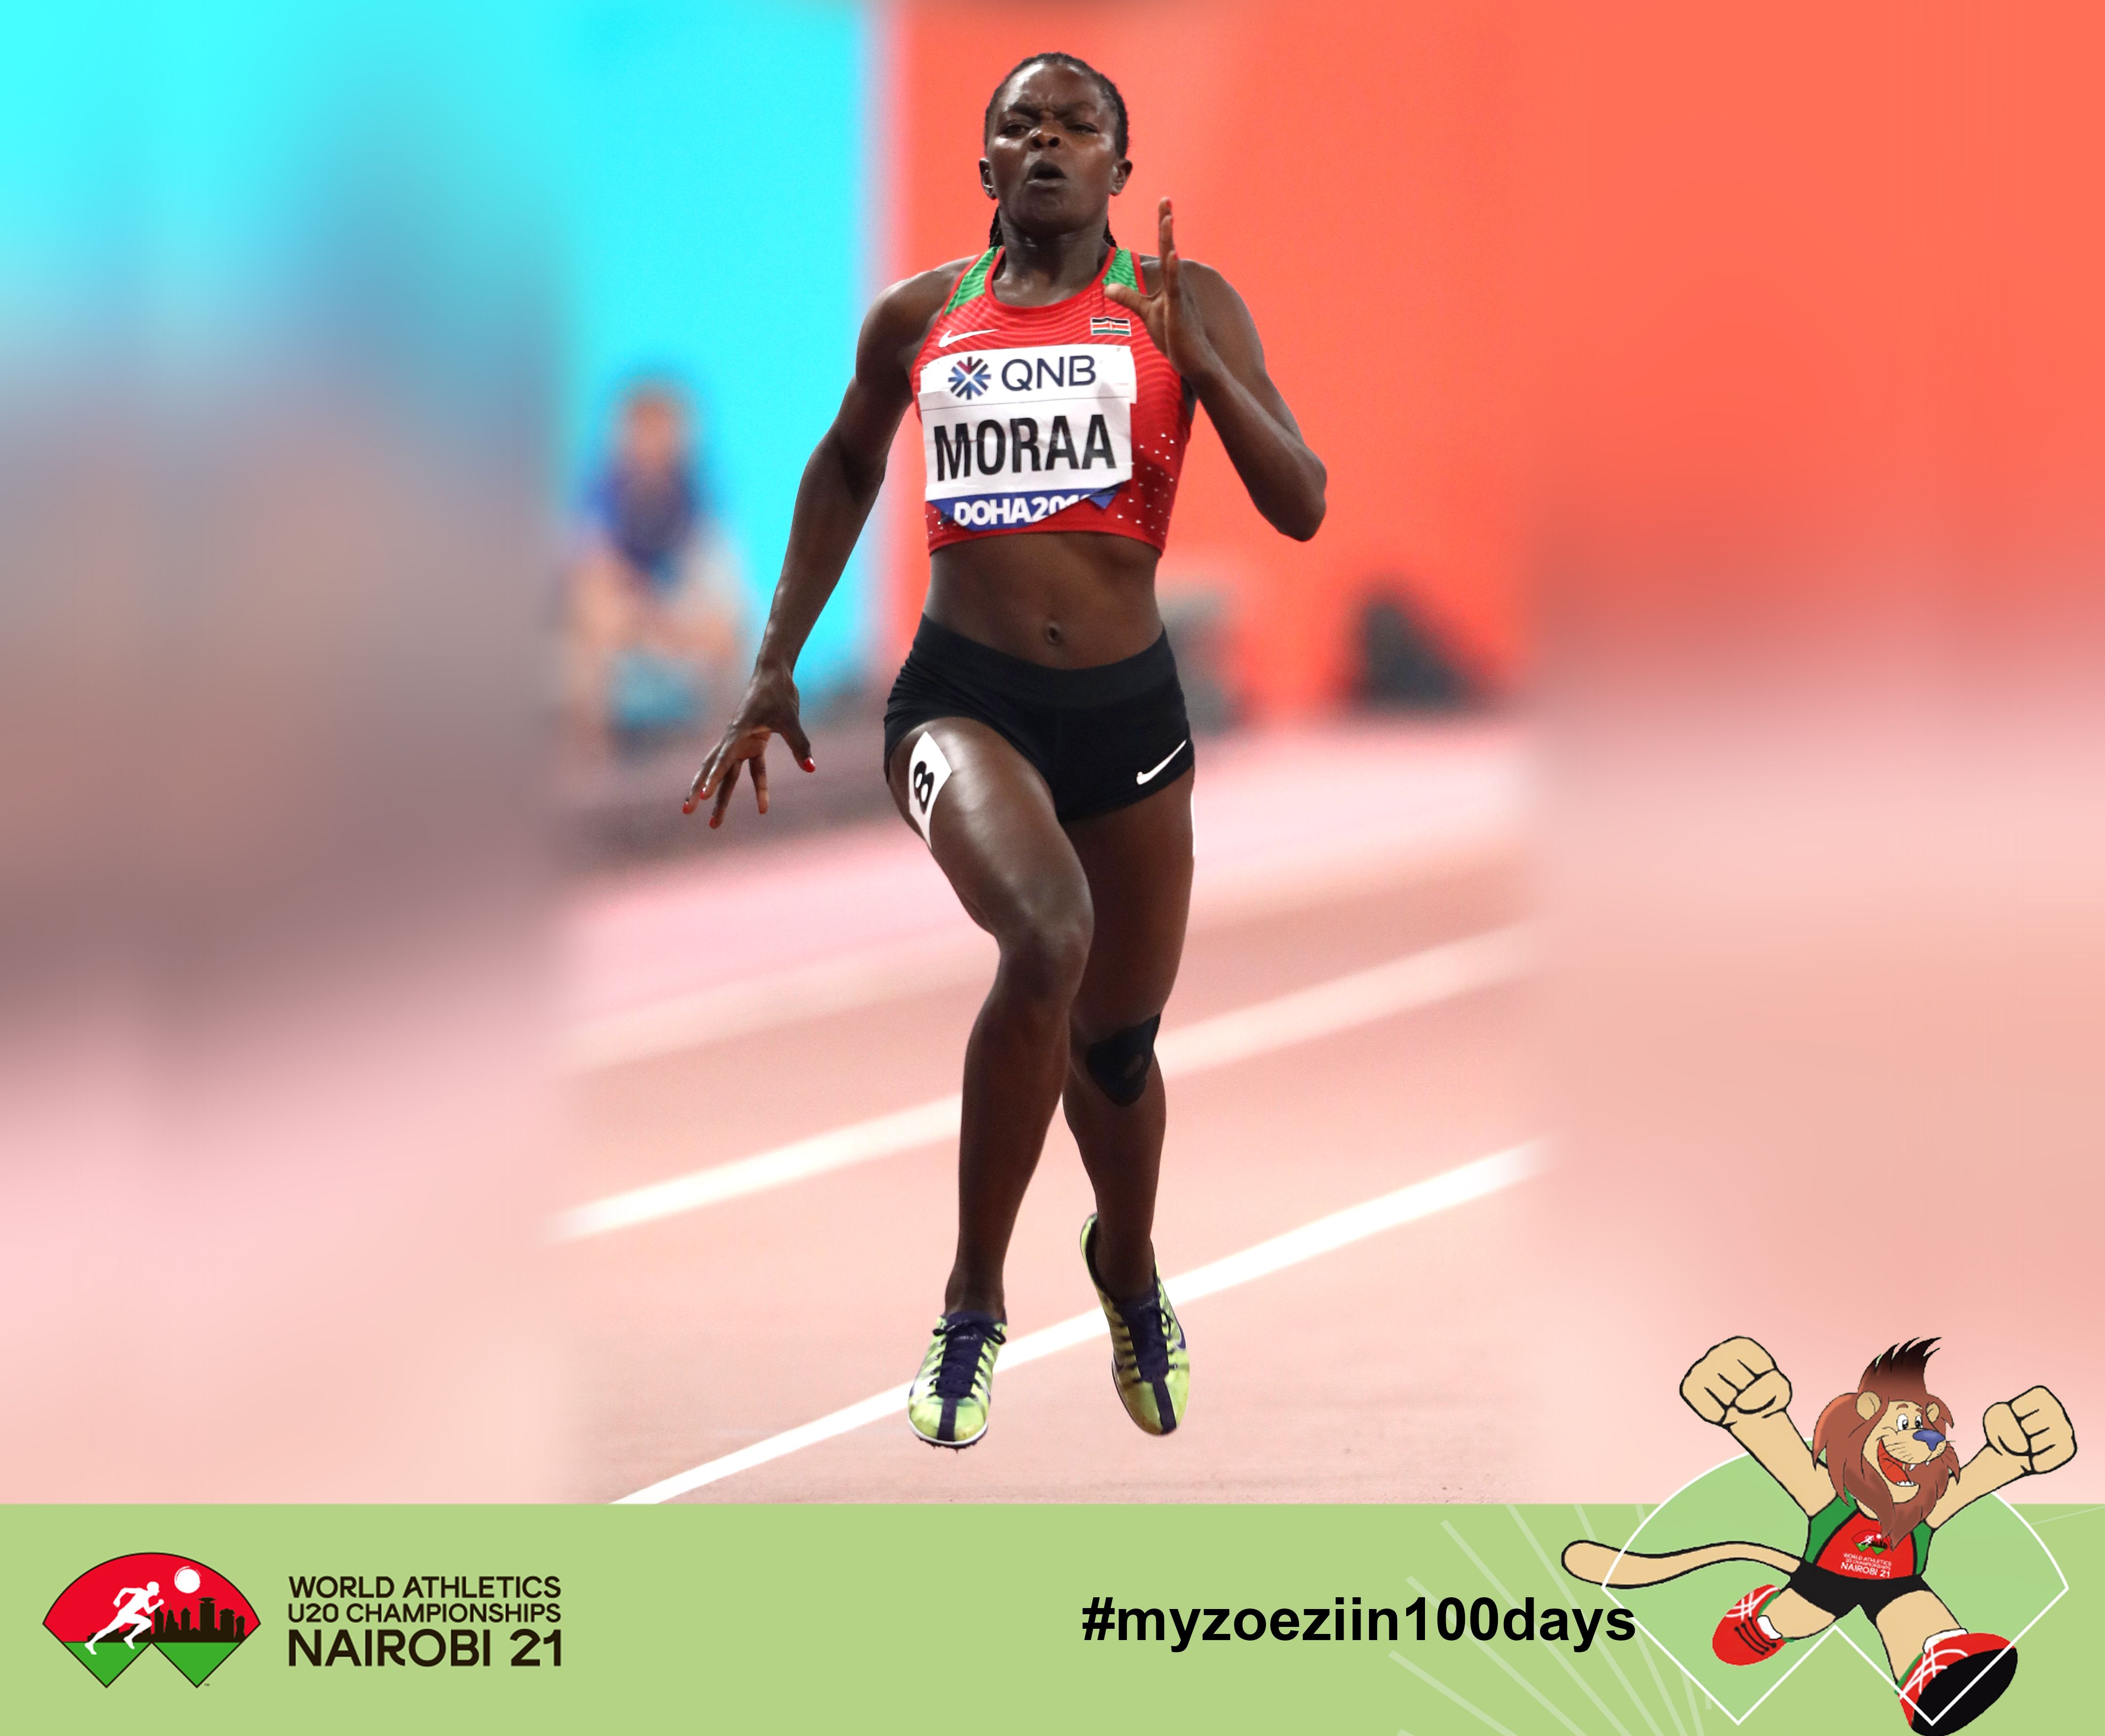 63 Days Countdown to World Athletics Under 20 Championships | FEATURE